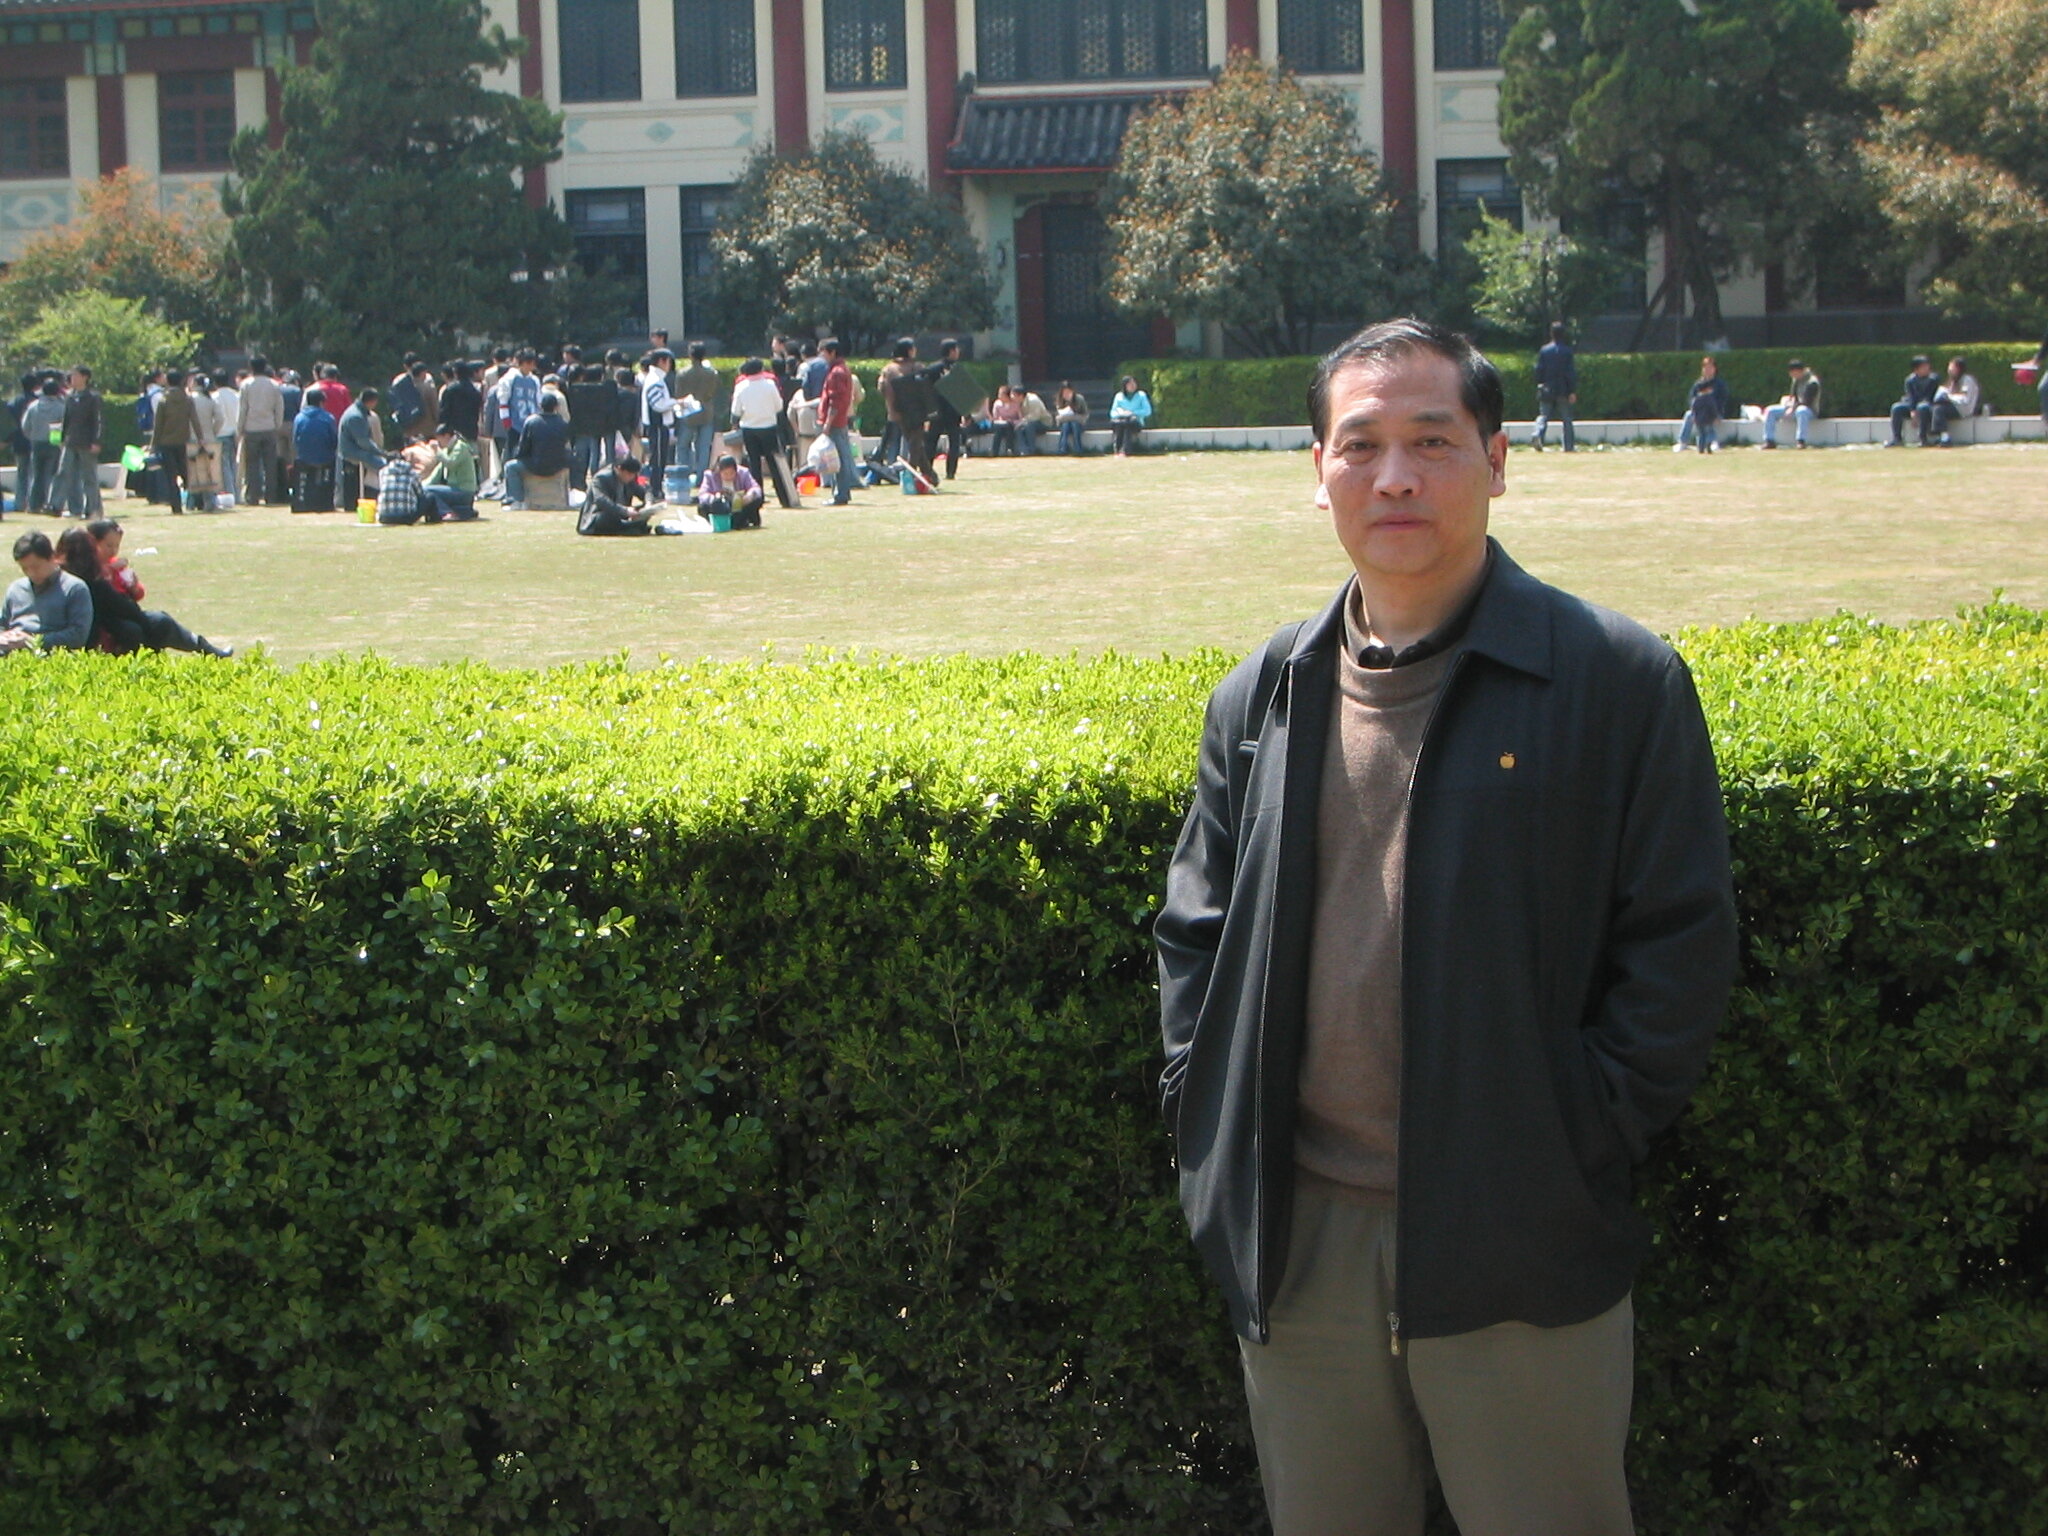  Wu Xiaoqing stands before a field at Nanjing Teacher’s College where his parents were attacked and ultimately murdered by Red Guards on August 3, 1966. Their killings were the first of the Cultural Revolution.  